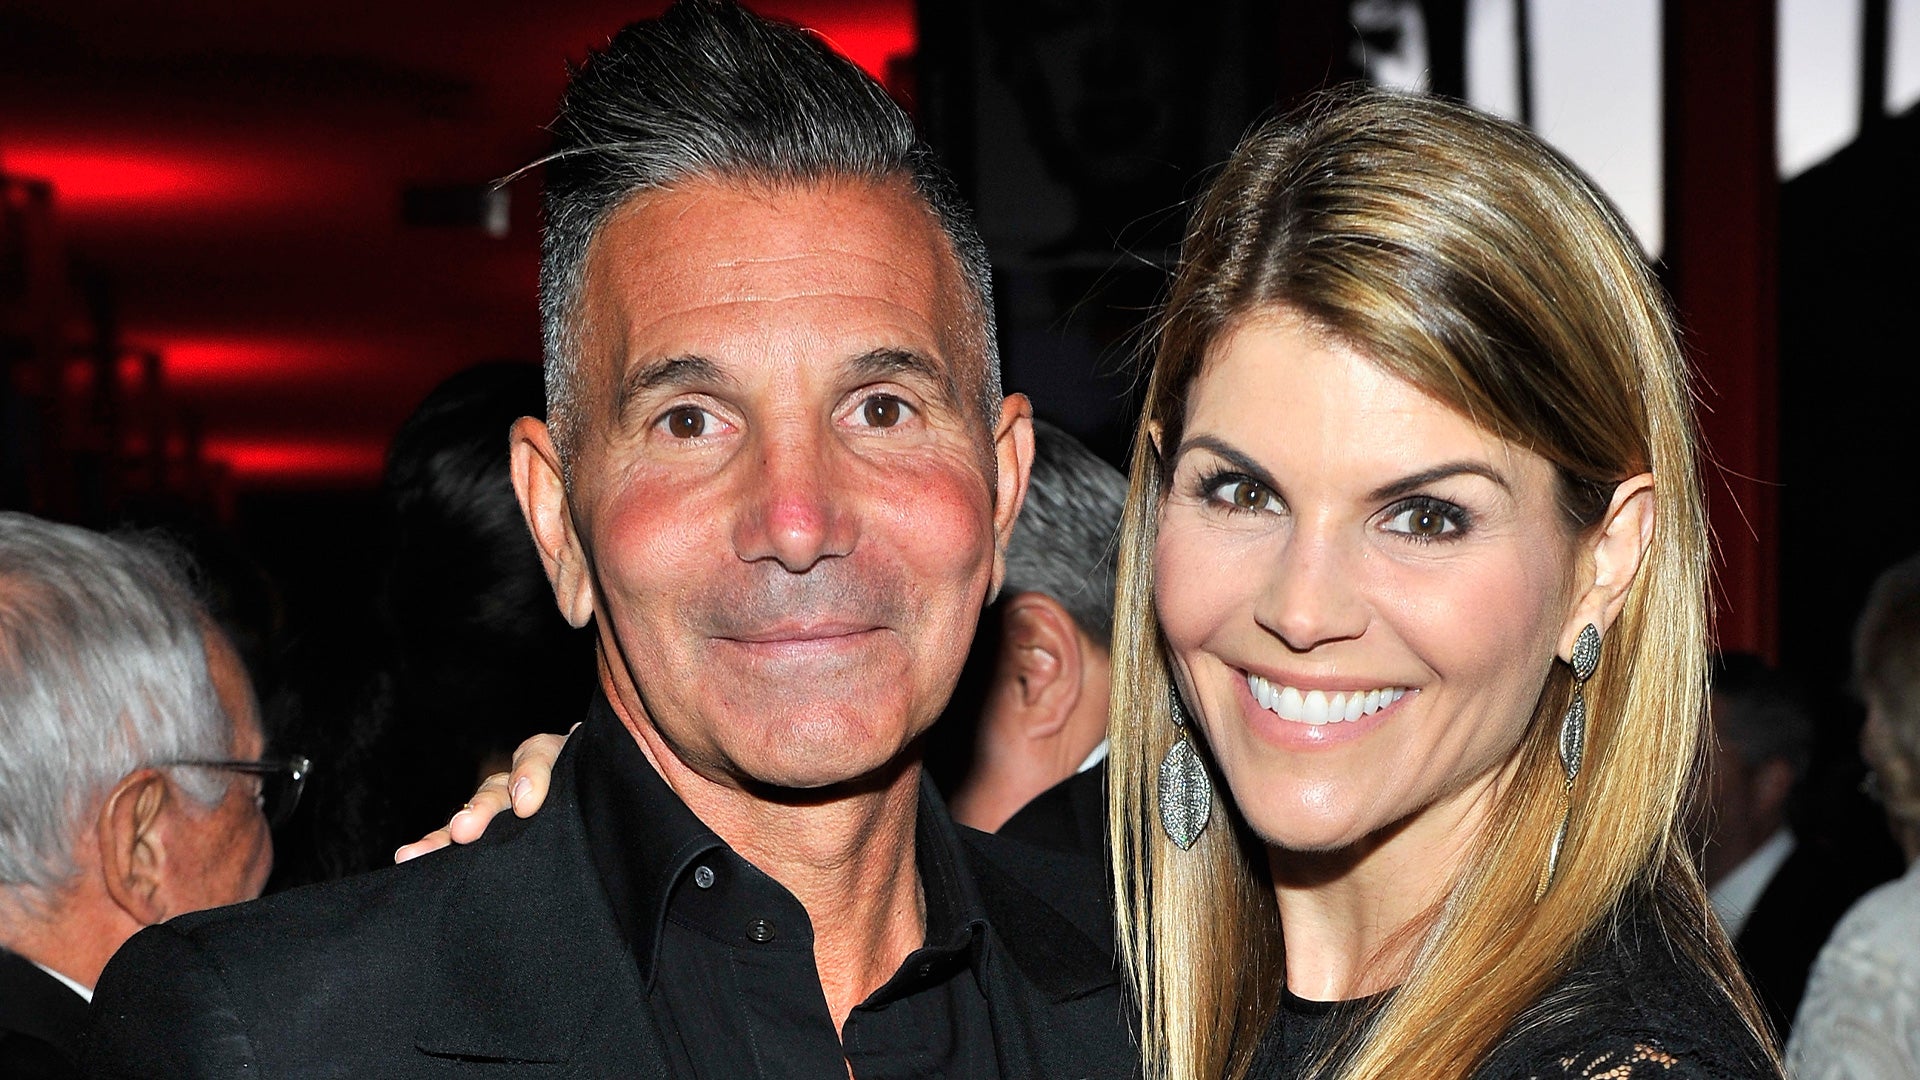 Lori Loughlin and Mossimo Giannulli Agree to Plead Guilty in College Admissions Case